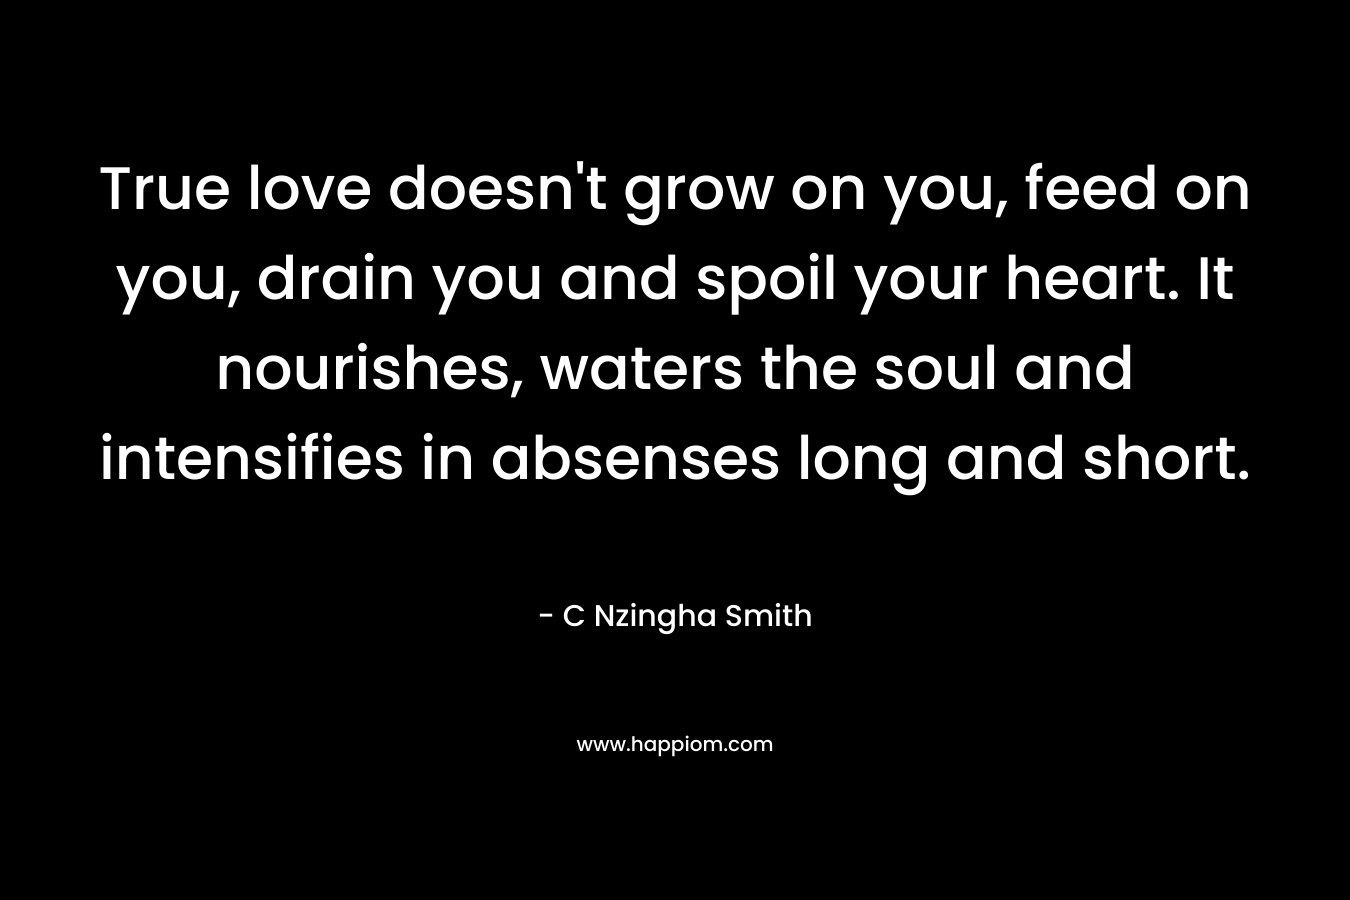 True love doesn’t grow on you, feed on you, drain you and spoil your heart. It nourishes, waters the soul and intensifies in absenses long and short. – C Nzingha Smith